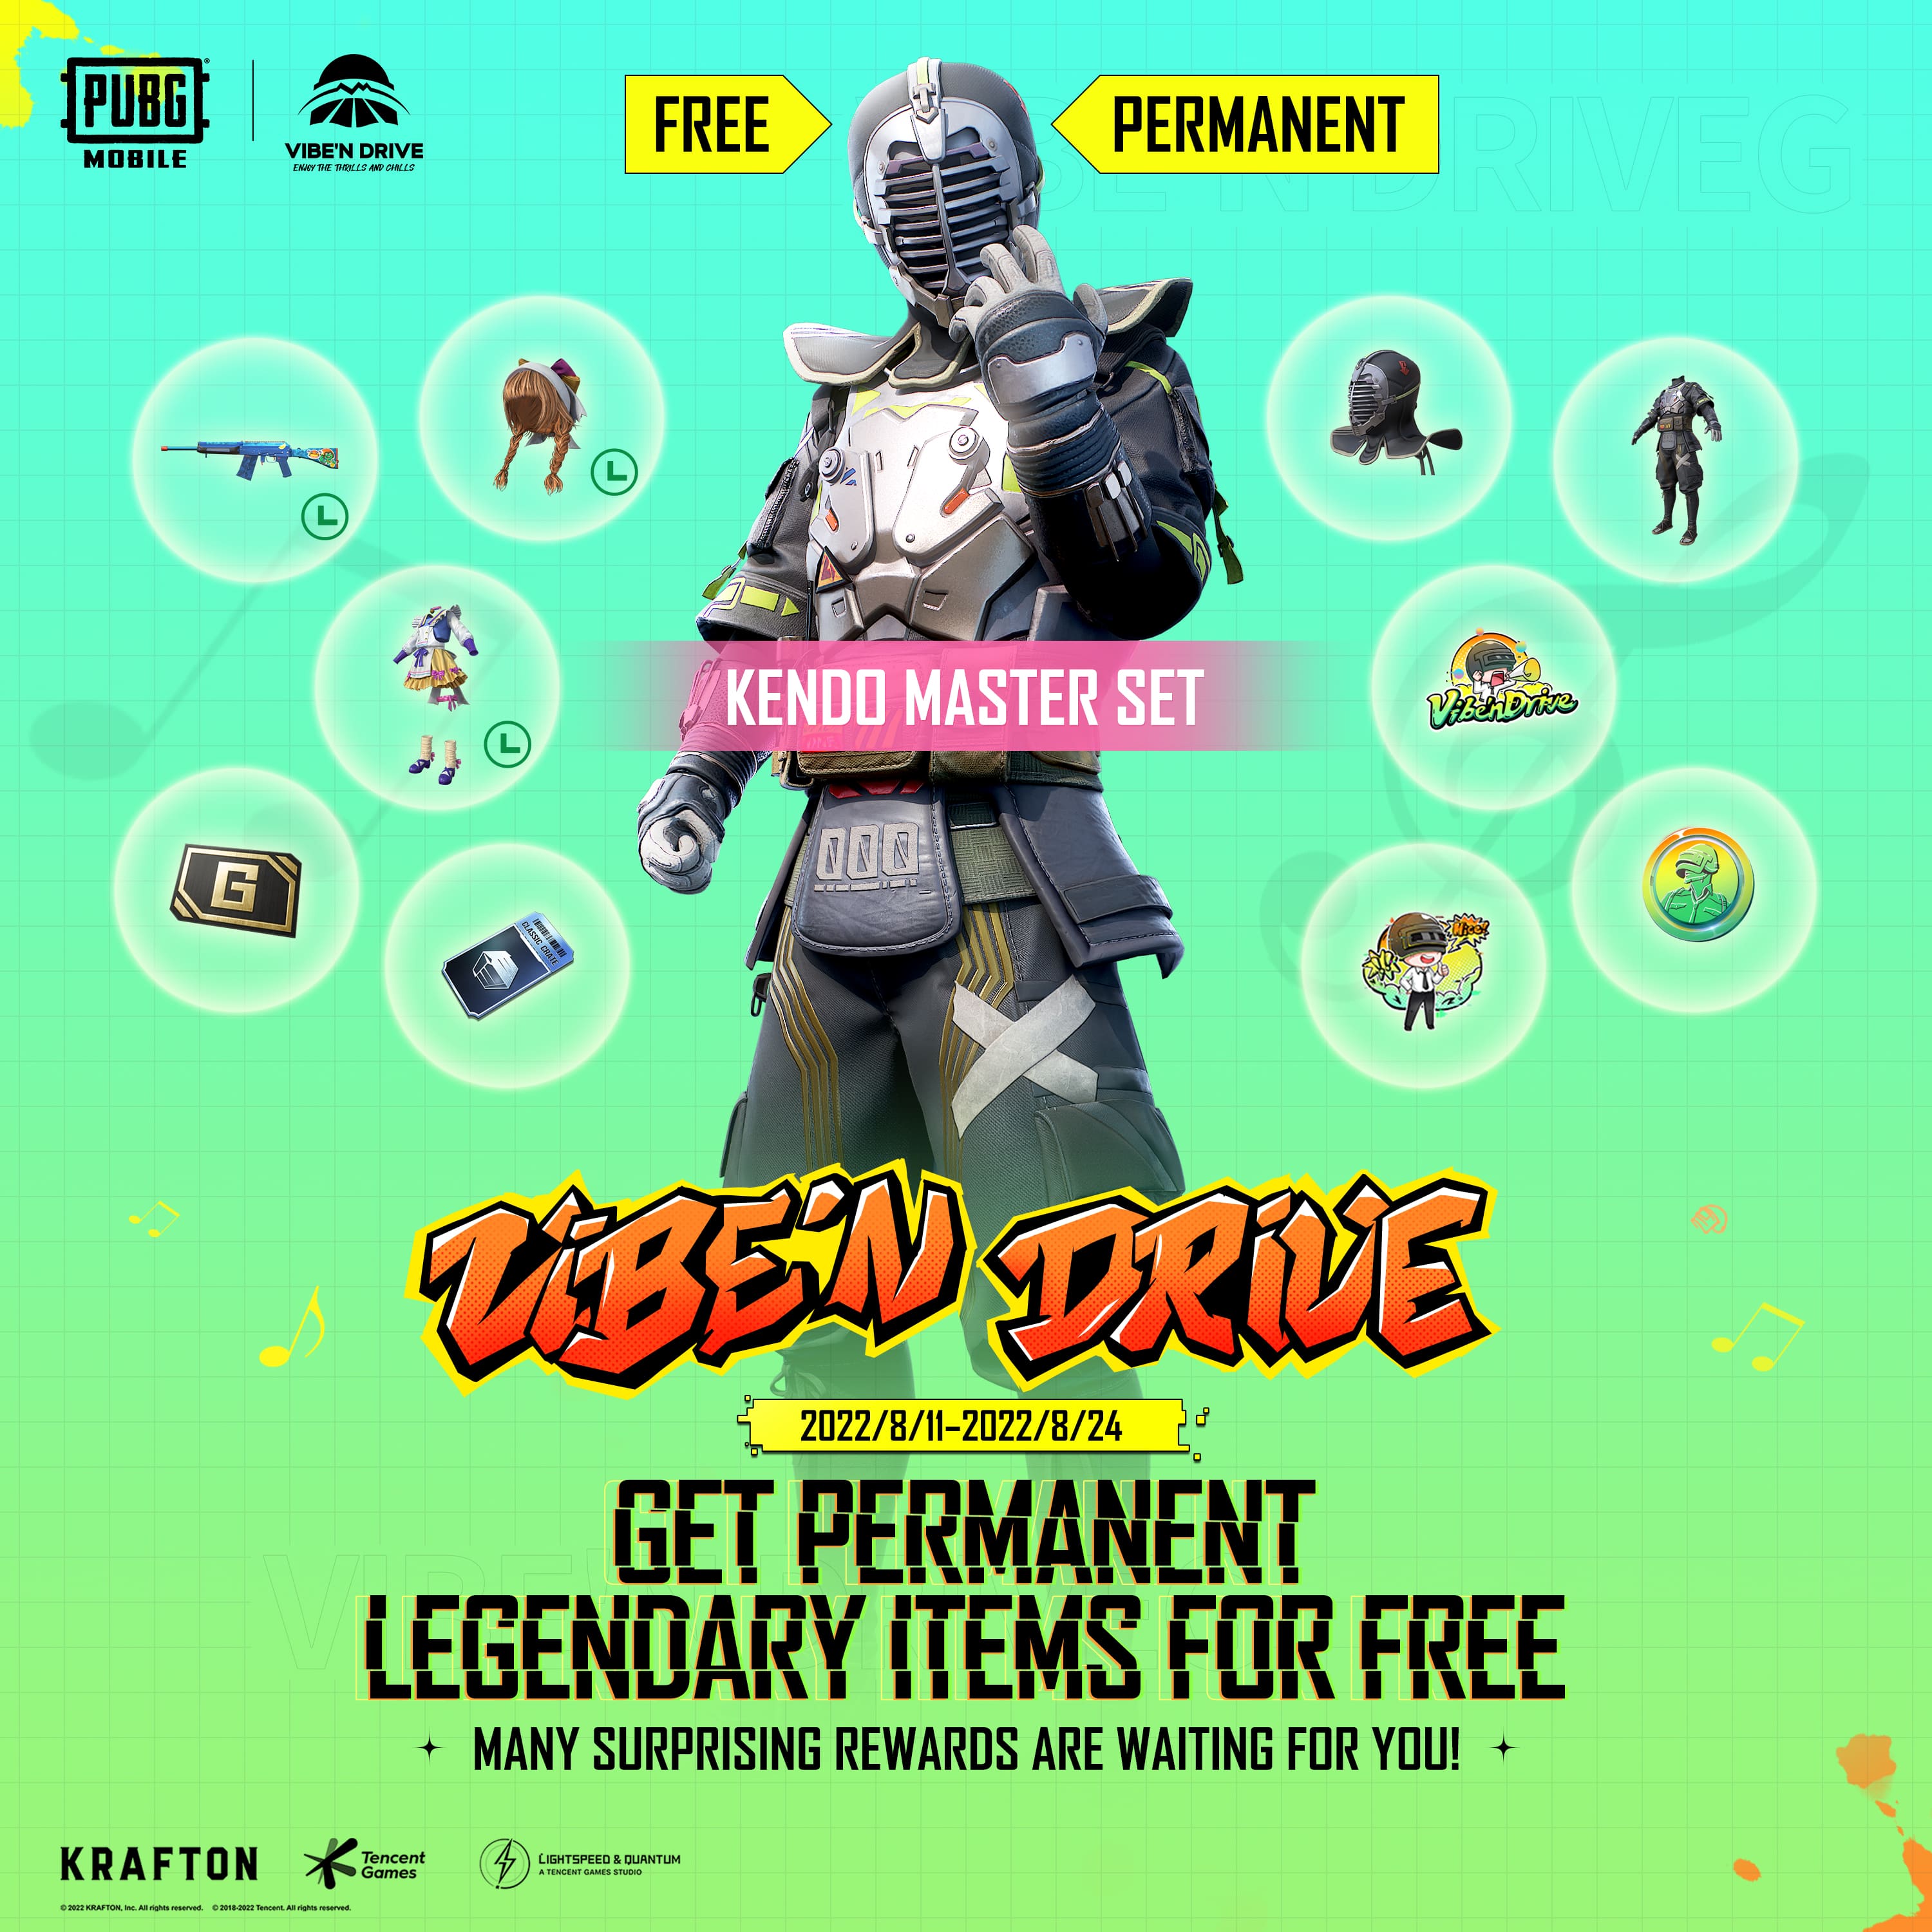 PUBG Mobile reveals the Vibe’n Drive event calendar featuring free permanent items PC